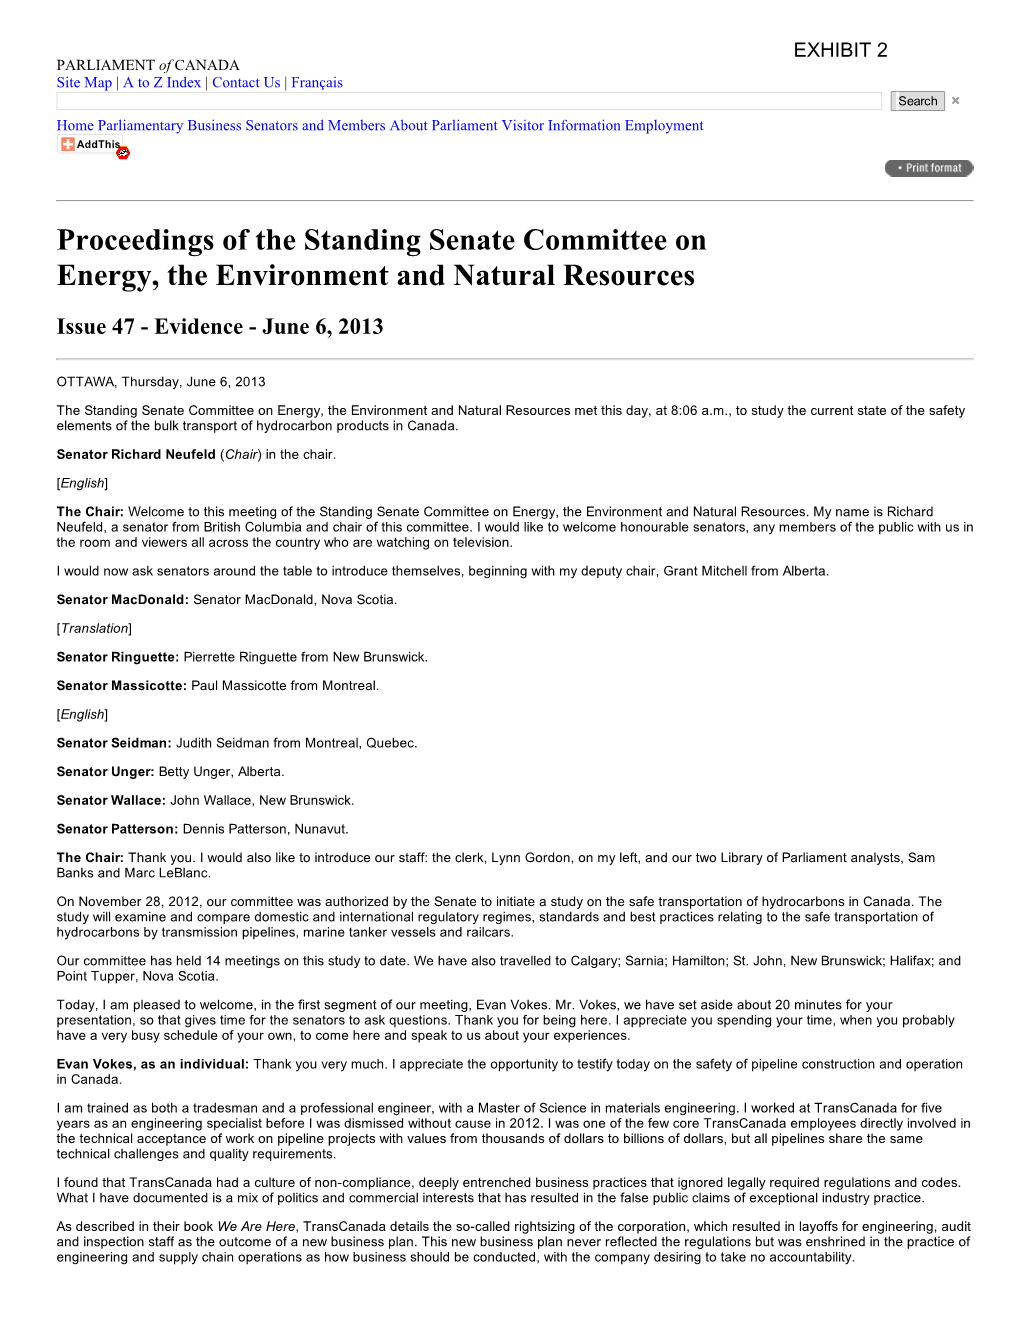 Proceedings of the Standing Senate Committee on Energy, the Environment and Natural Resources